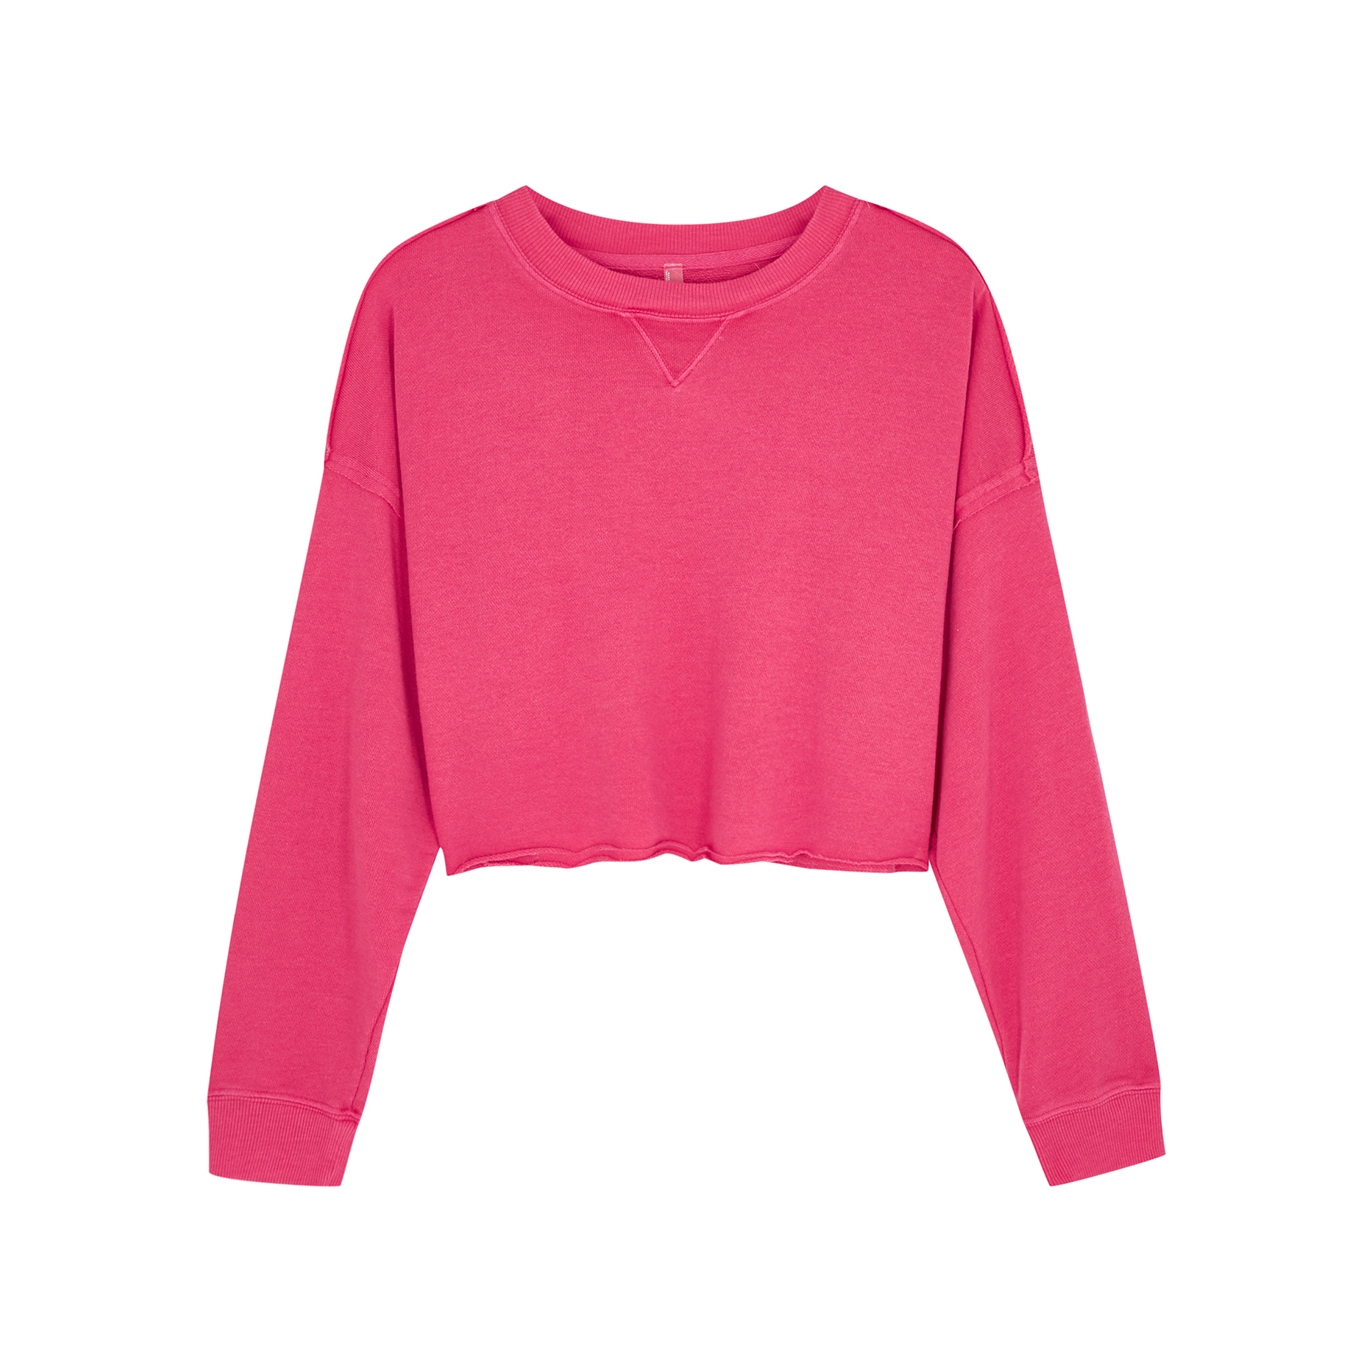 Free People Movement Cut It Out Pink Cropped Cotton-blend Sweatshirt - L